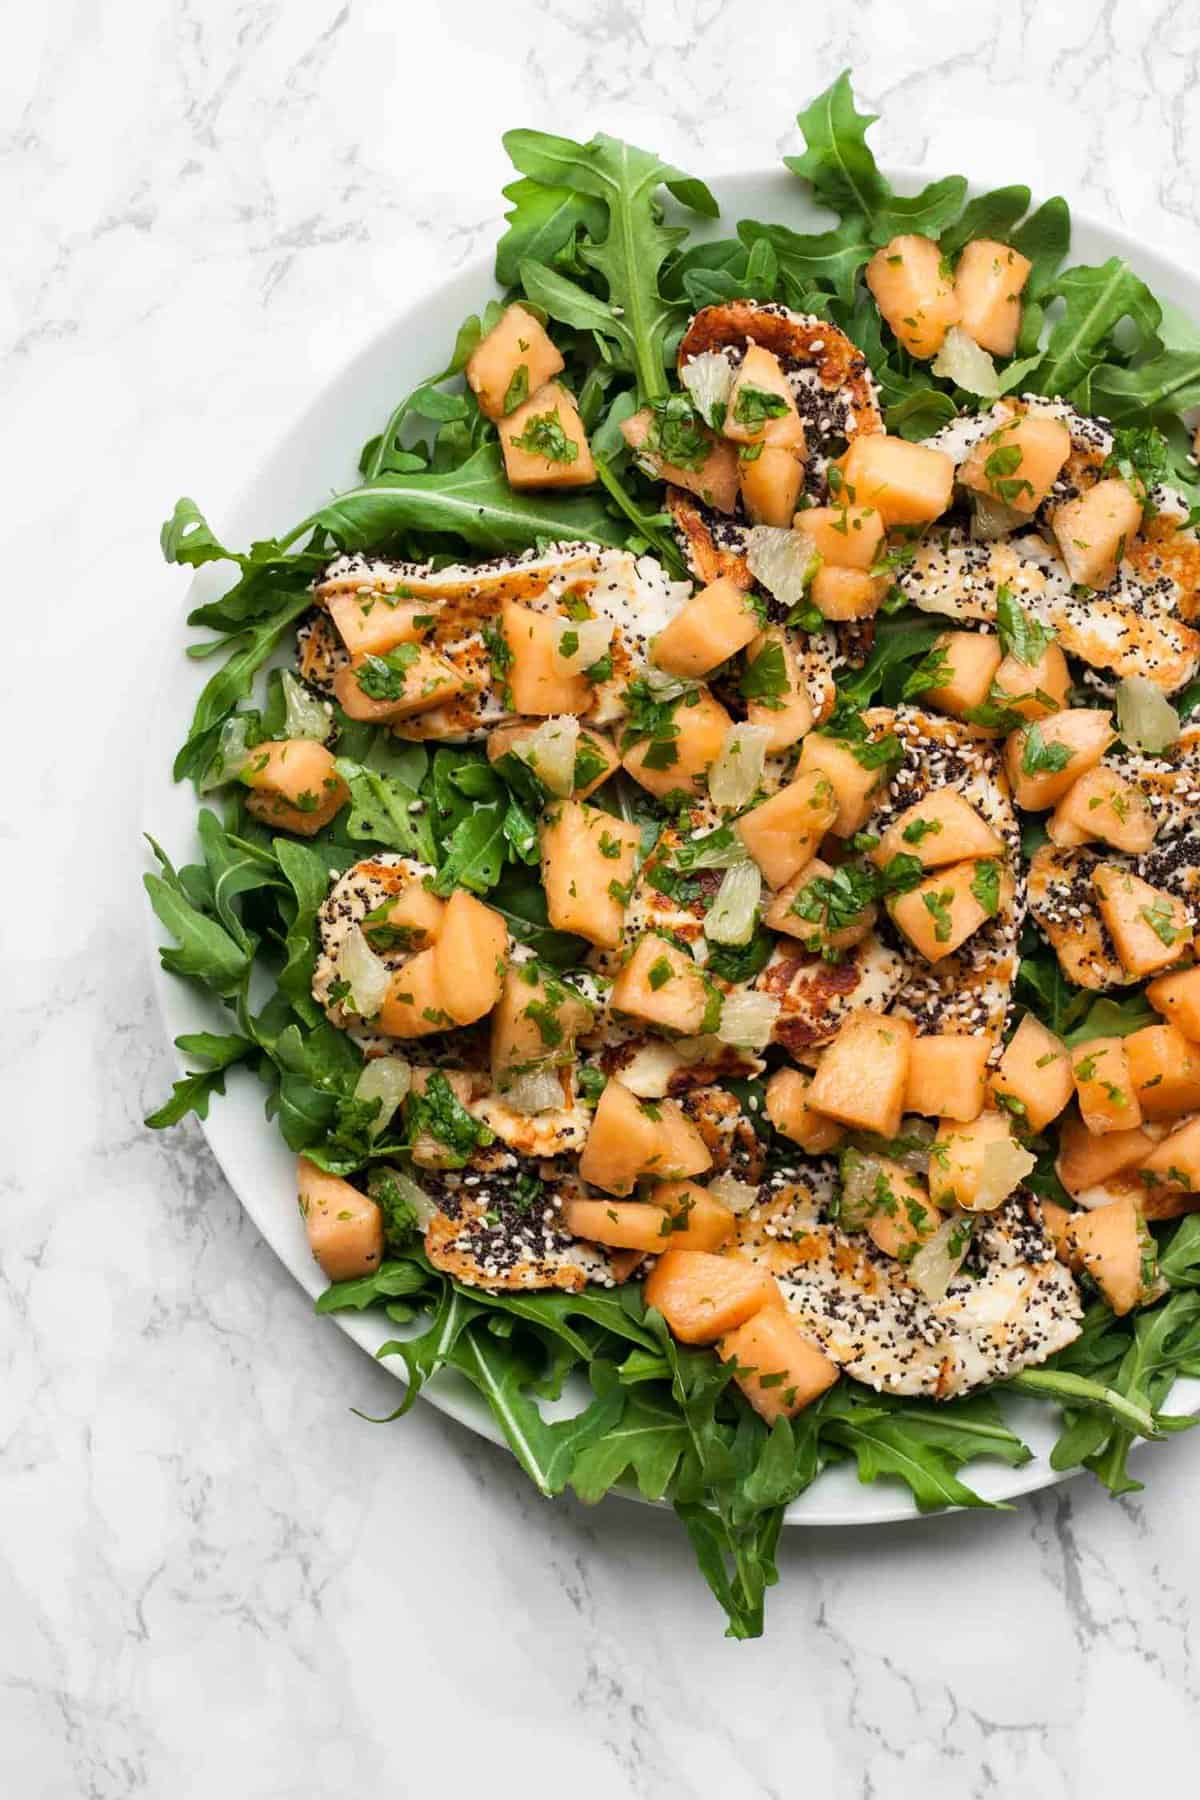 A platter with sesame crusted halloumi on top of salad leaves with marinated melon.